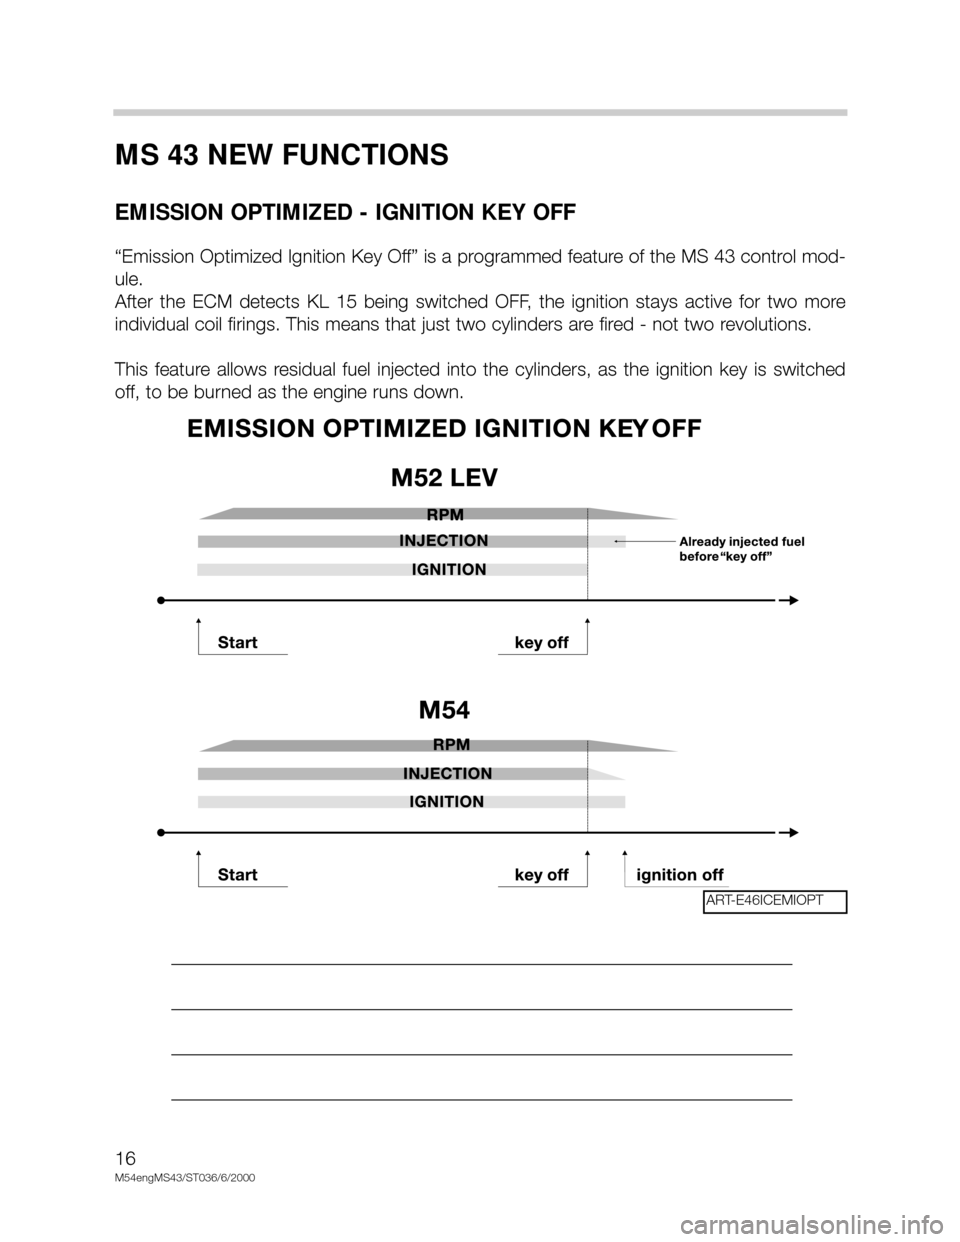 BMW X5 2000 E53 M54 Engine Workshop Manual 16
M54engMS43/ST036/6/2000
MS 43 NEW FUNCTIONS
EMISSION OPTIMIZED - IGNITION KEY OFF
“Emission Optimized Ignition Key Off” is a programmed feature of the MS 43 control mod-
ule. 
After  the  ECM  